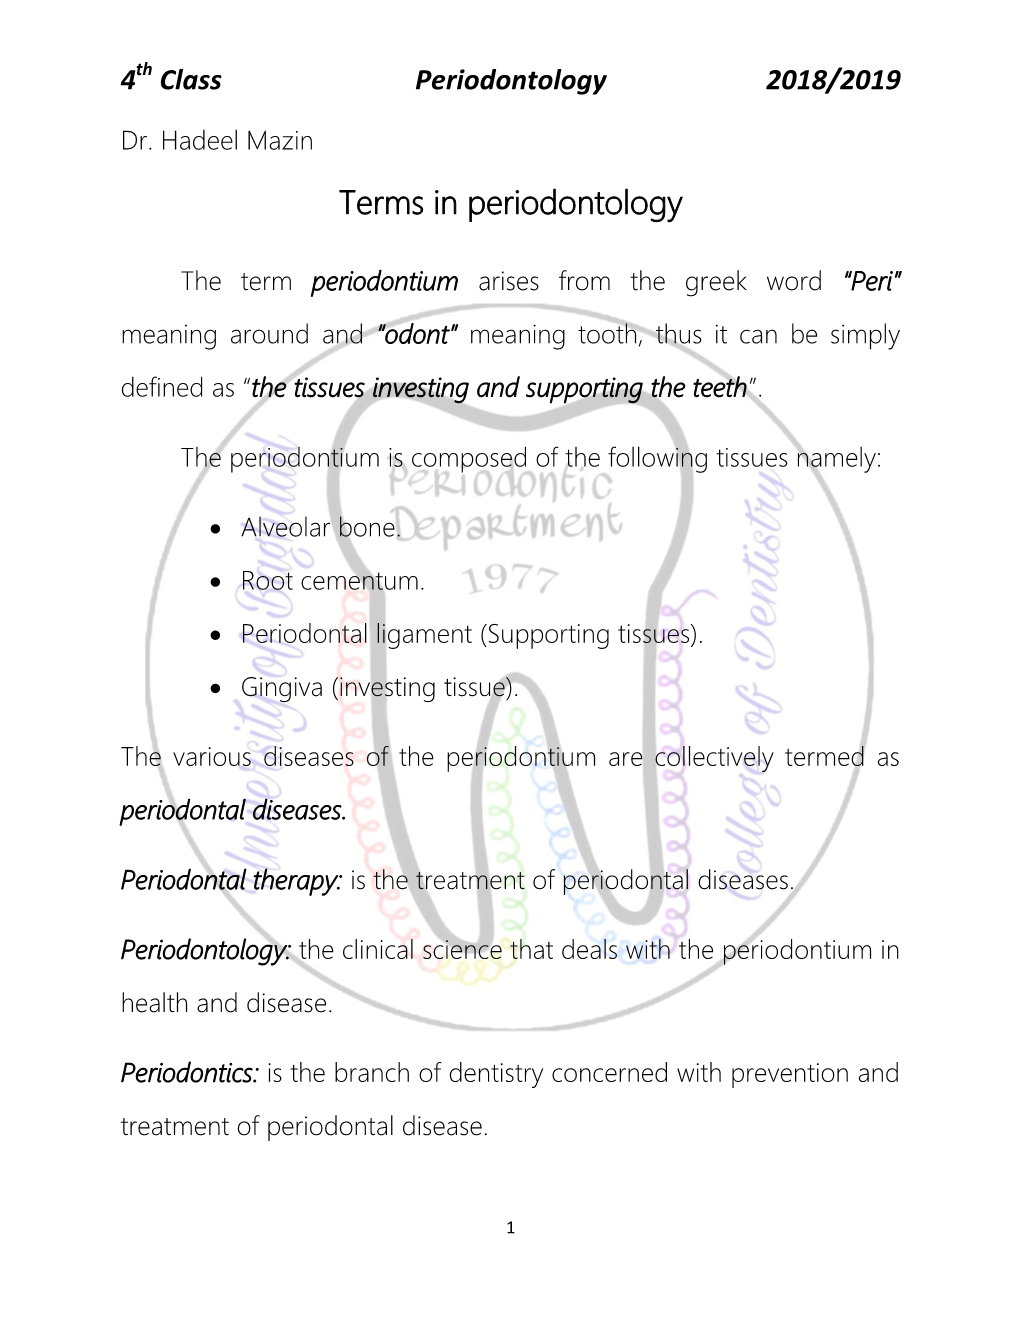 Terms in Periodontology